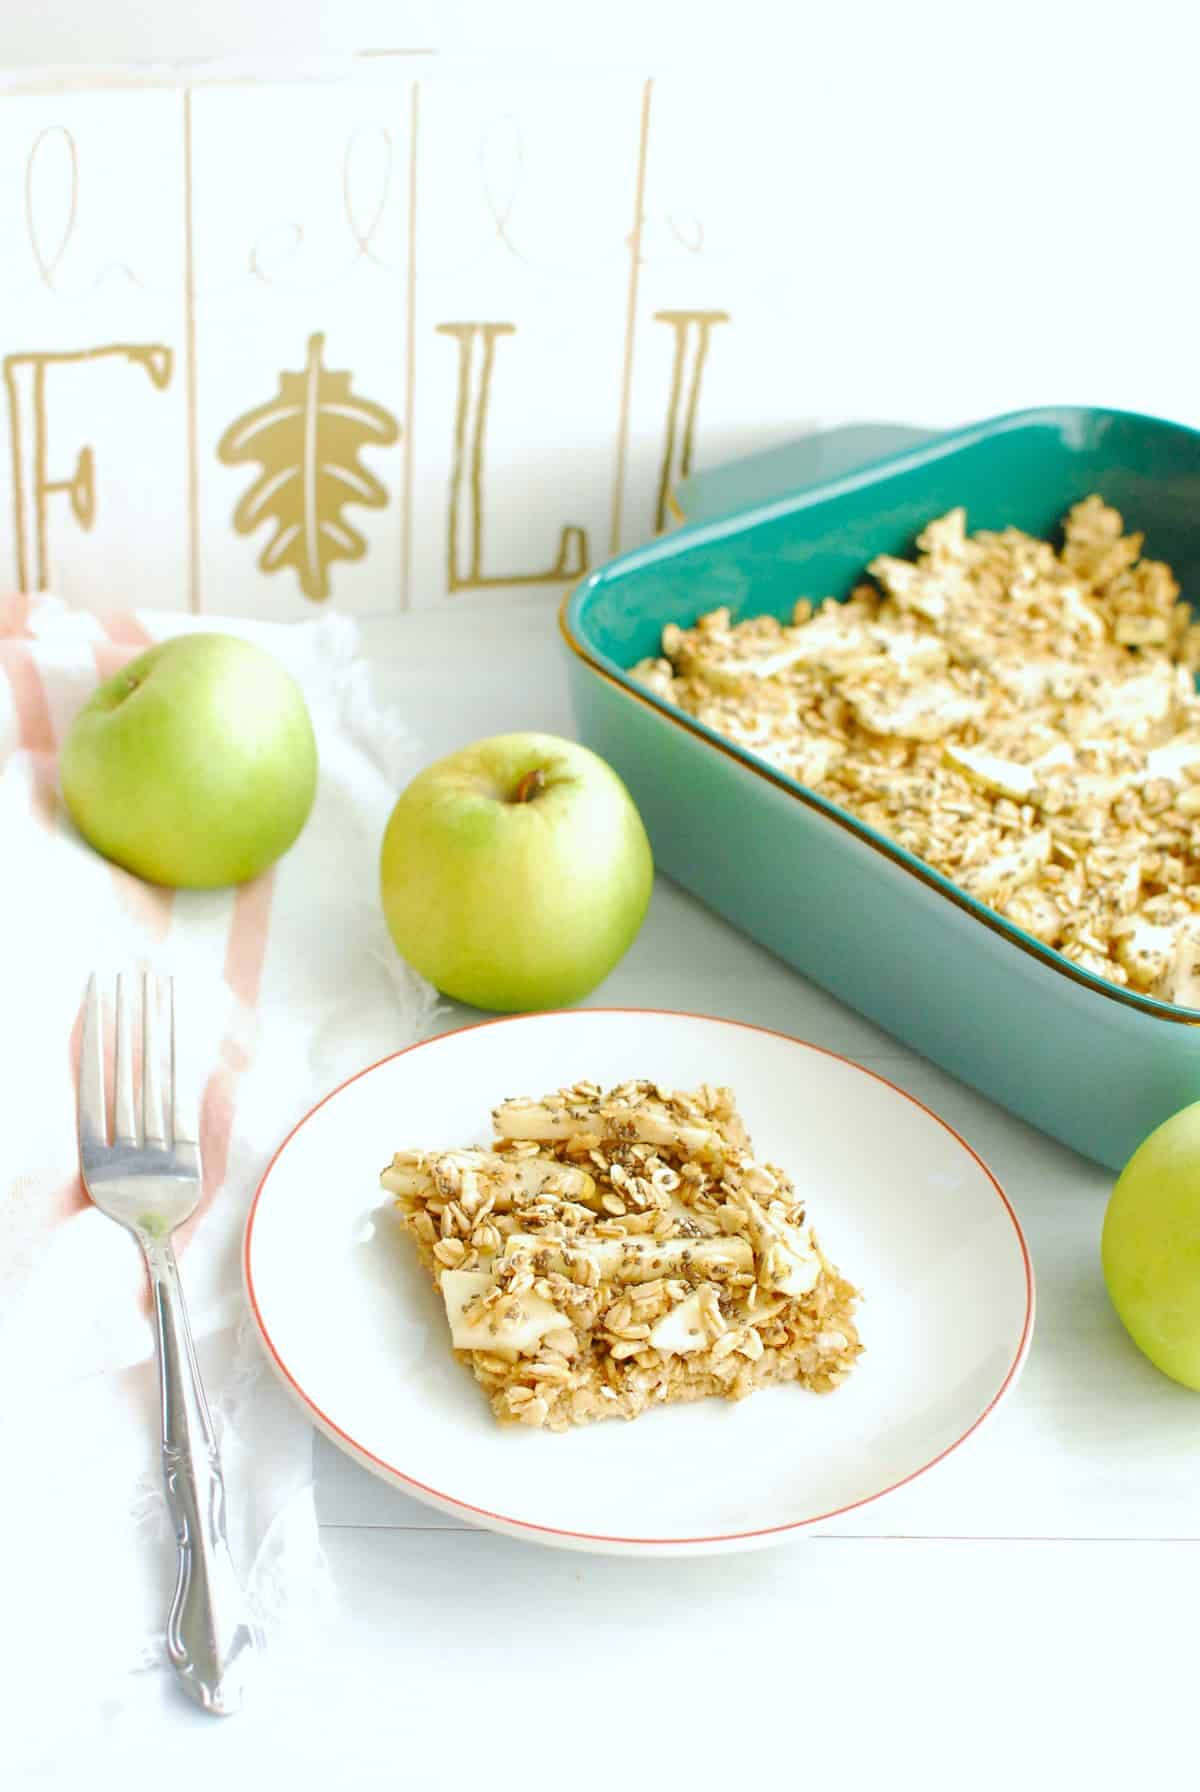 A healthy apple breakfast bar on a white plate next to a fork, napkin, apples, and baking dish.